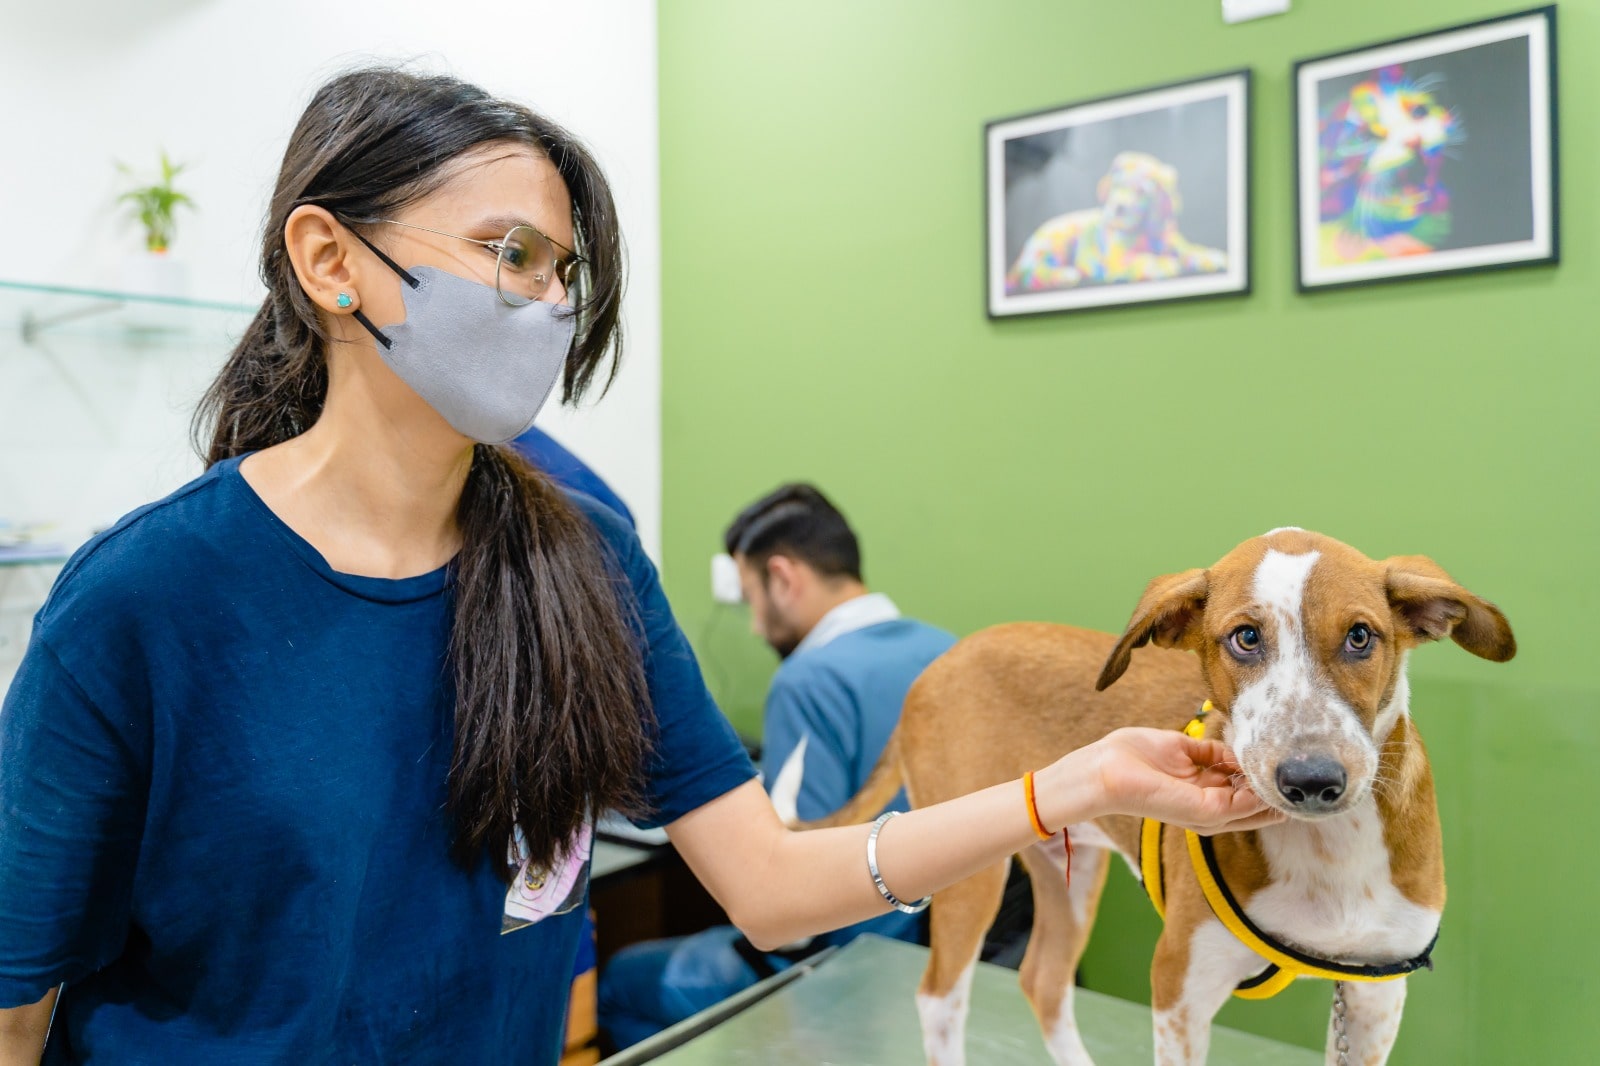 Photo of an dog mom scratching the lower jowl of her Indie dog. the dog is brown with a white muzzle and underside. he is wearing a bright yellow harness. the indie dog and pet parent are inside a vet's chamber as we can see the vet working on their computer in the background.